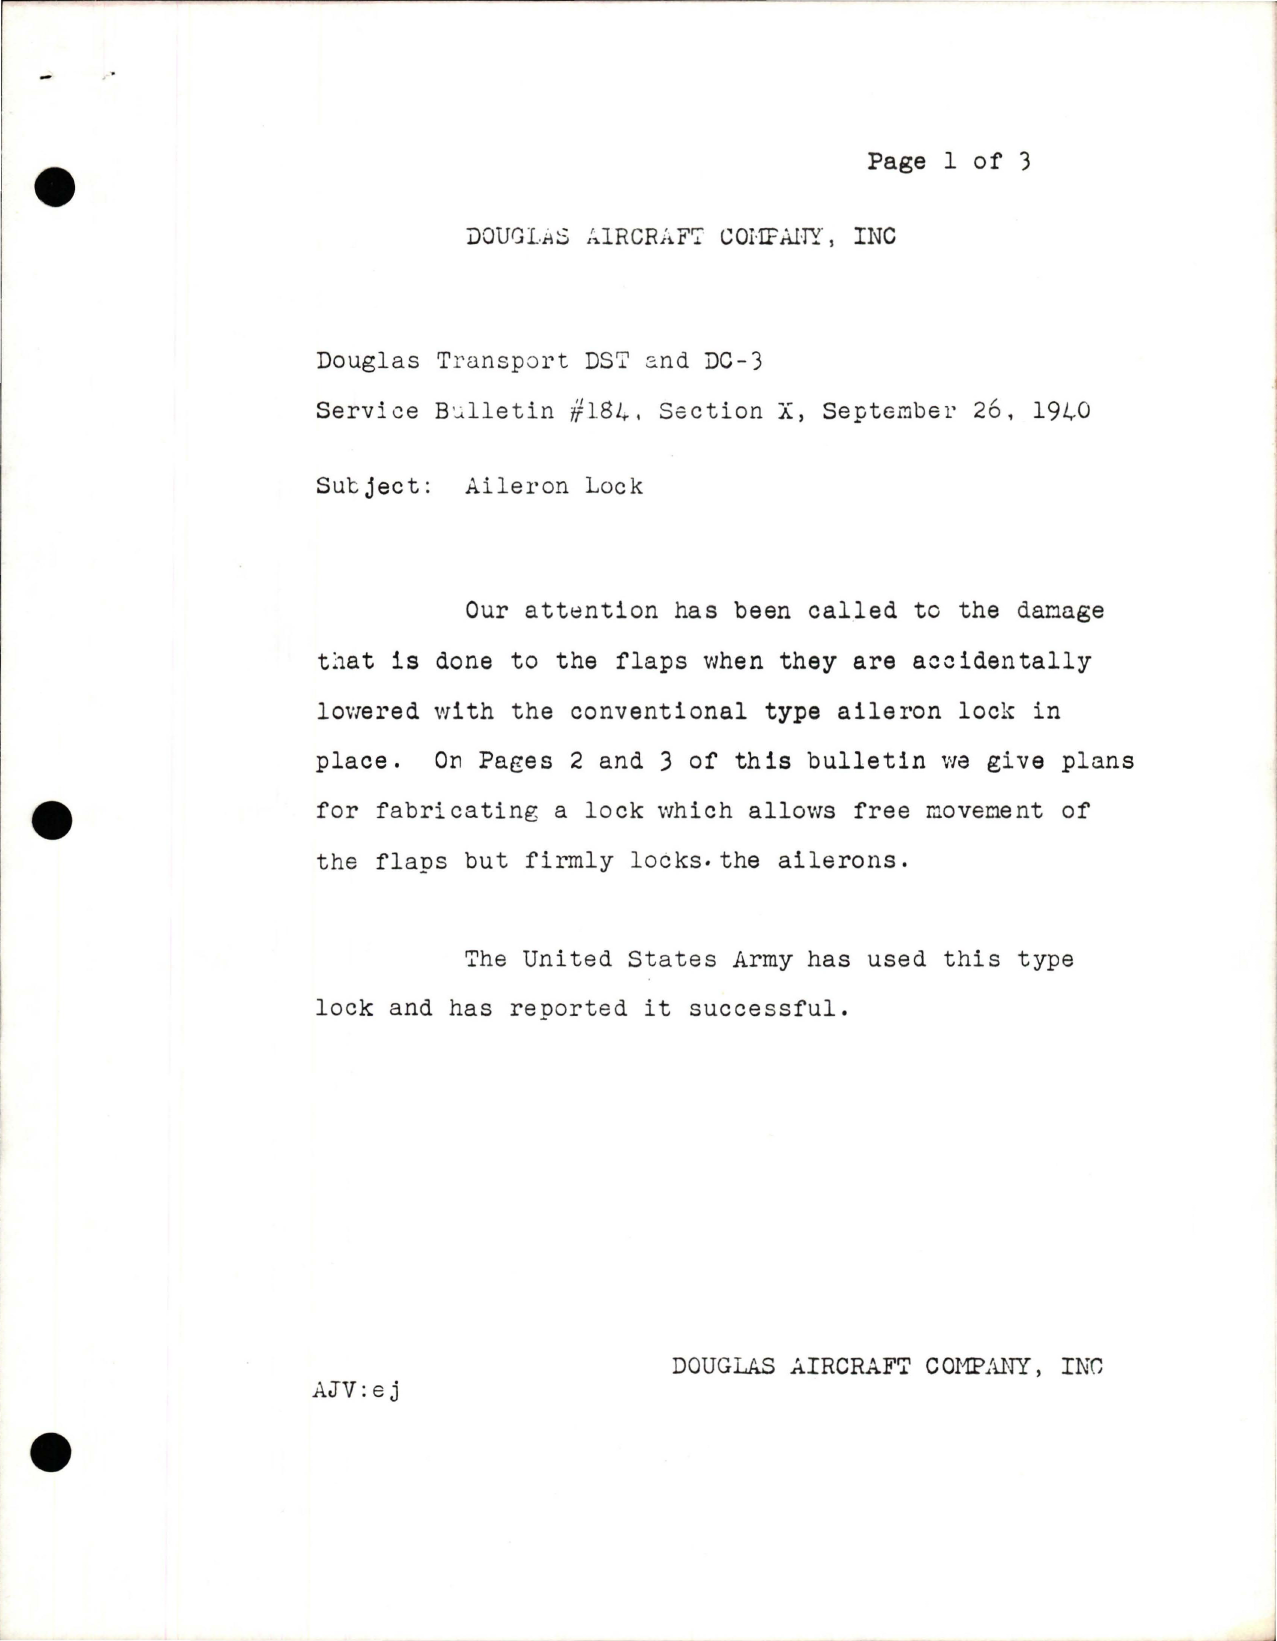 Sample page 1 from AirCorps Library document: Aileron Lock